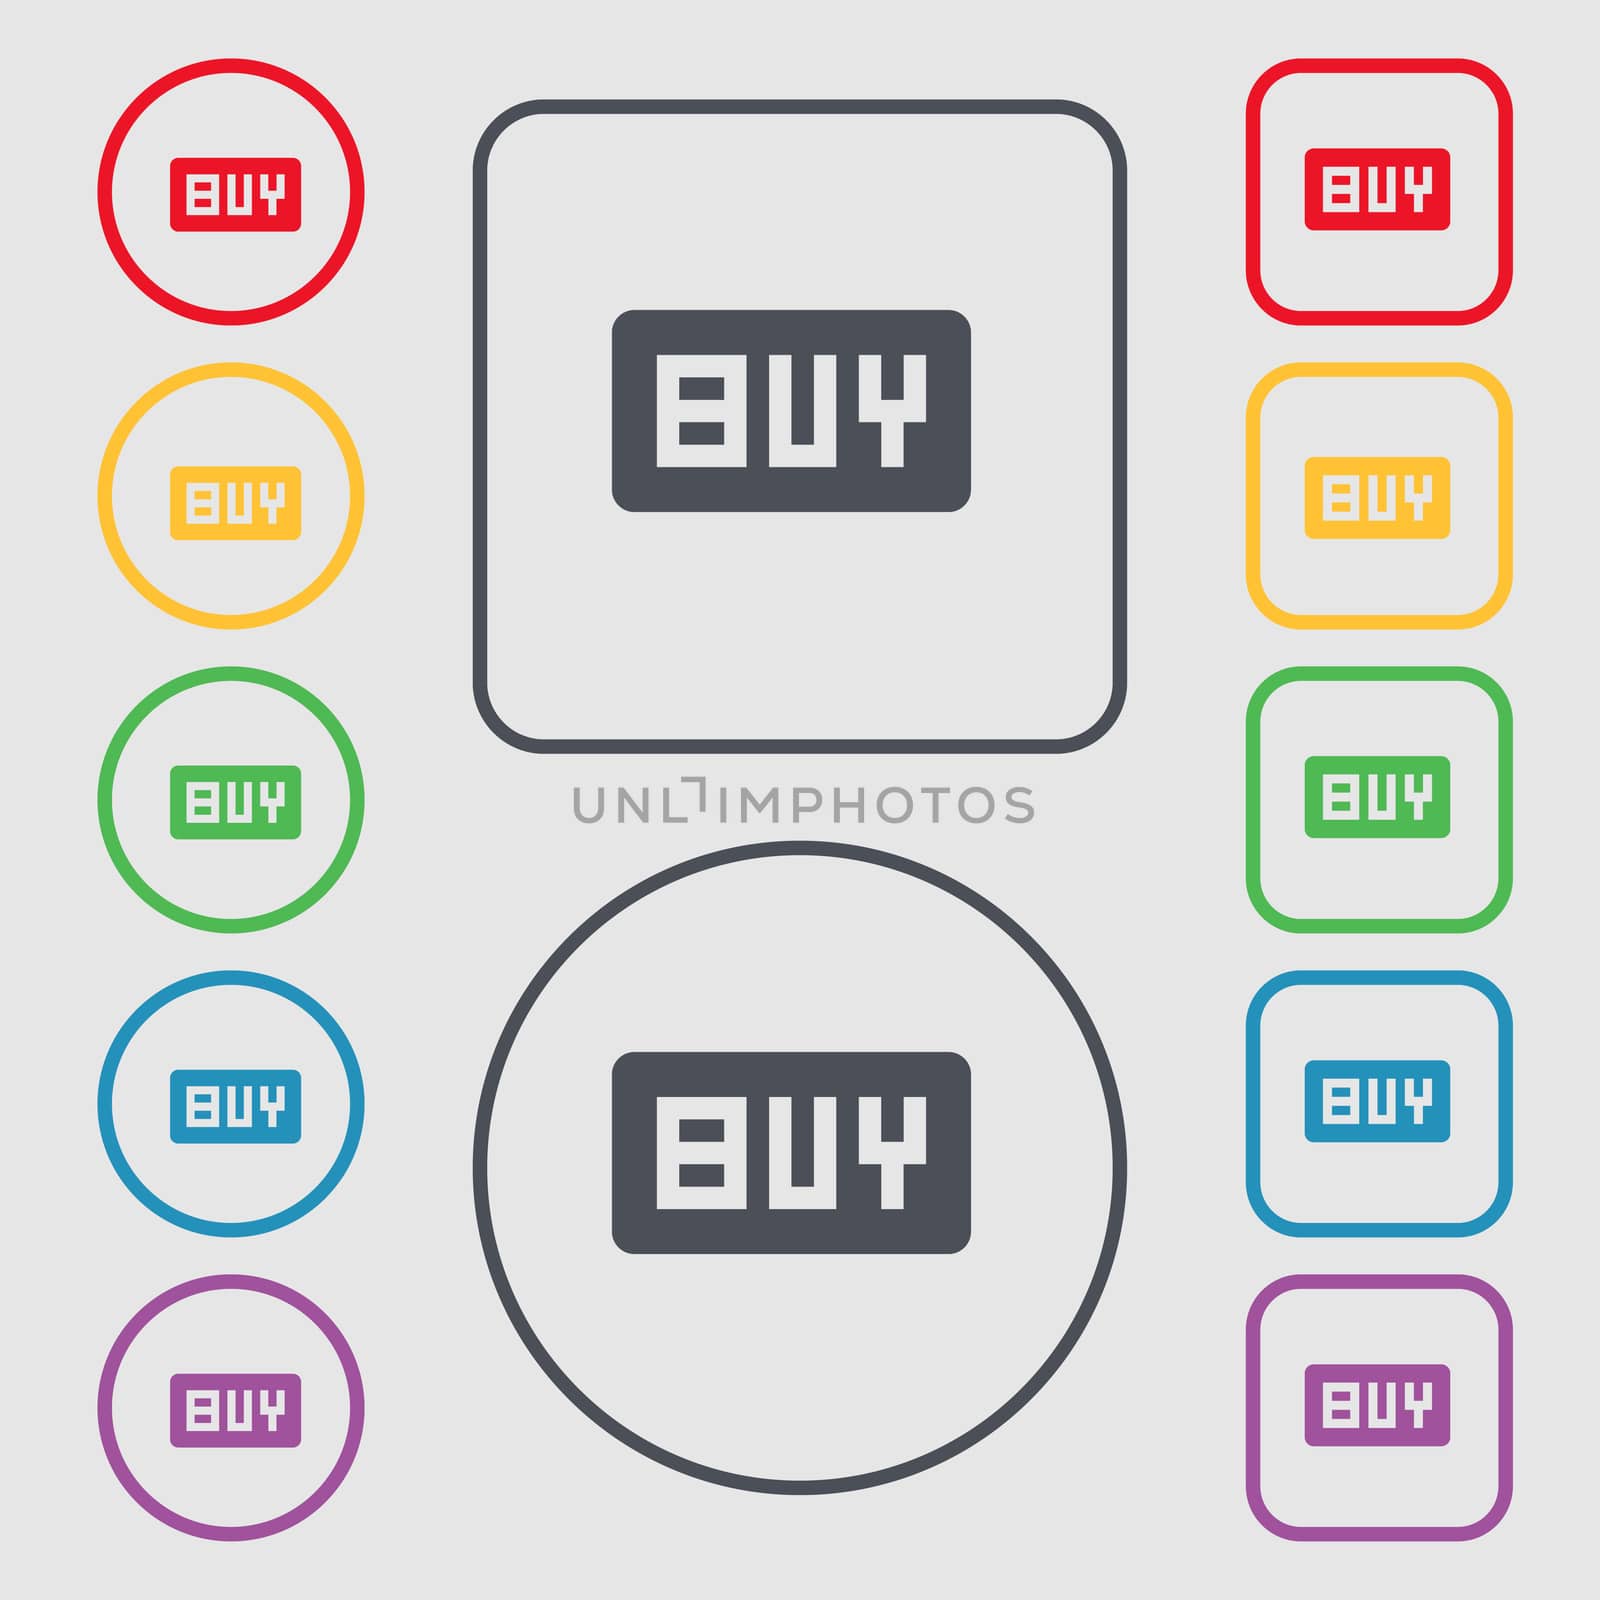 Buy, Online buying dollar usd icon sign. symbol on the Round and square buttons with frame. illustration